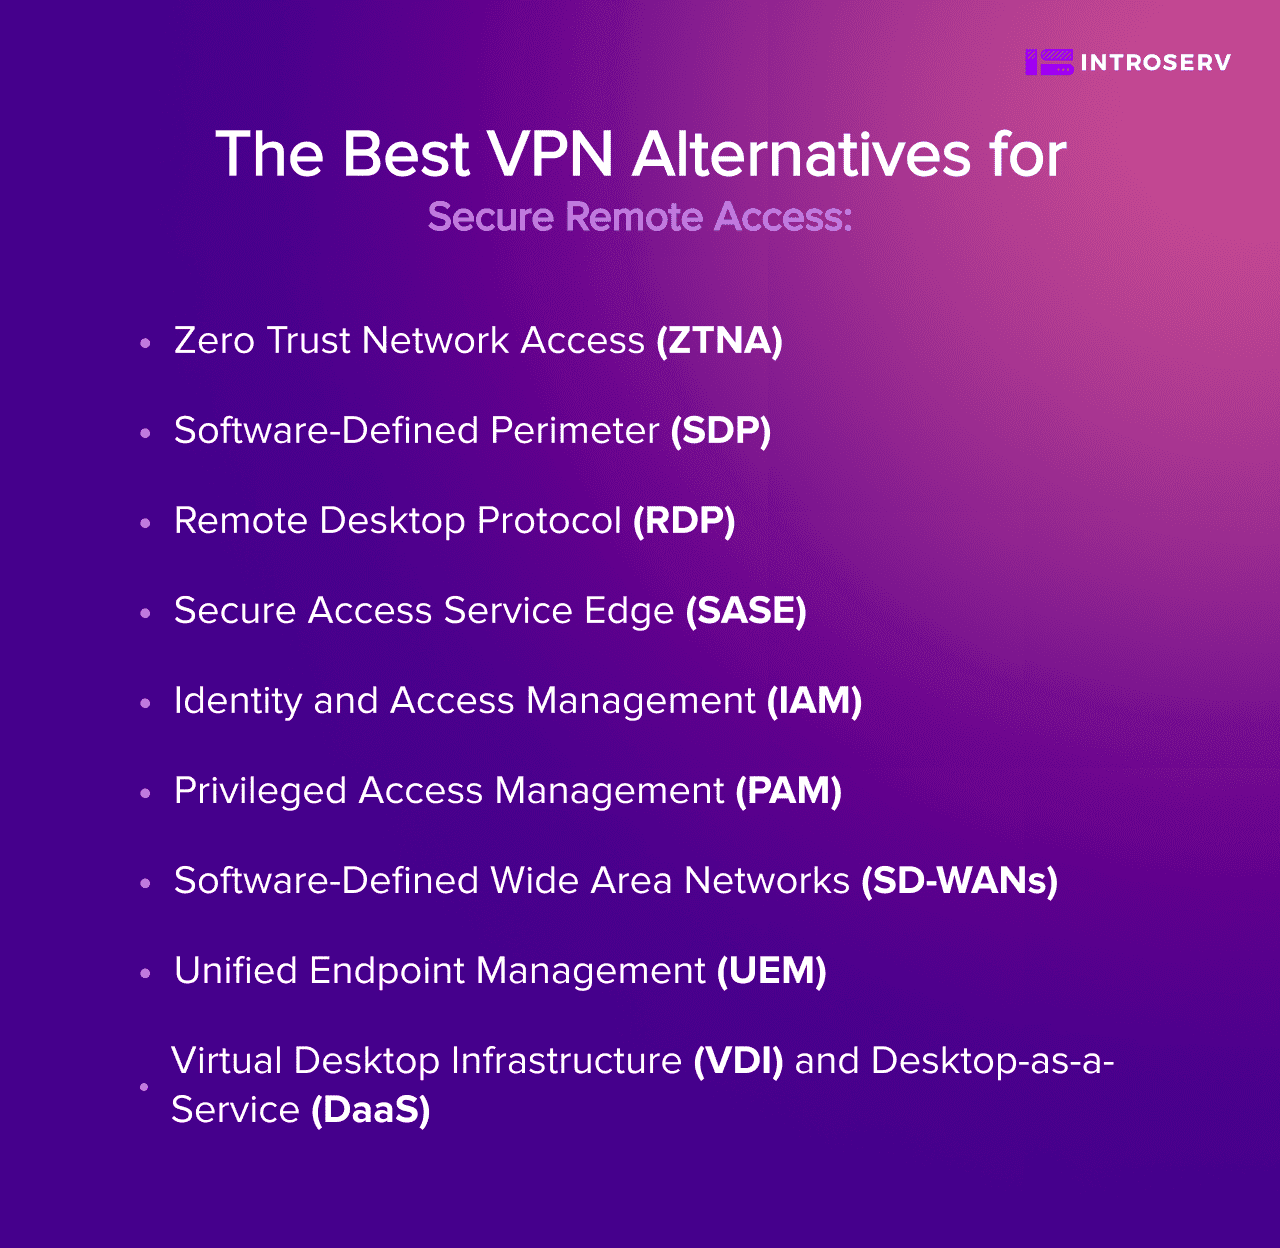 The Best VPN Alternatives for Secure Remote Access